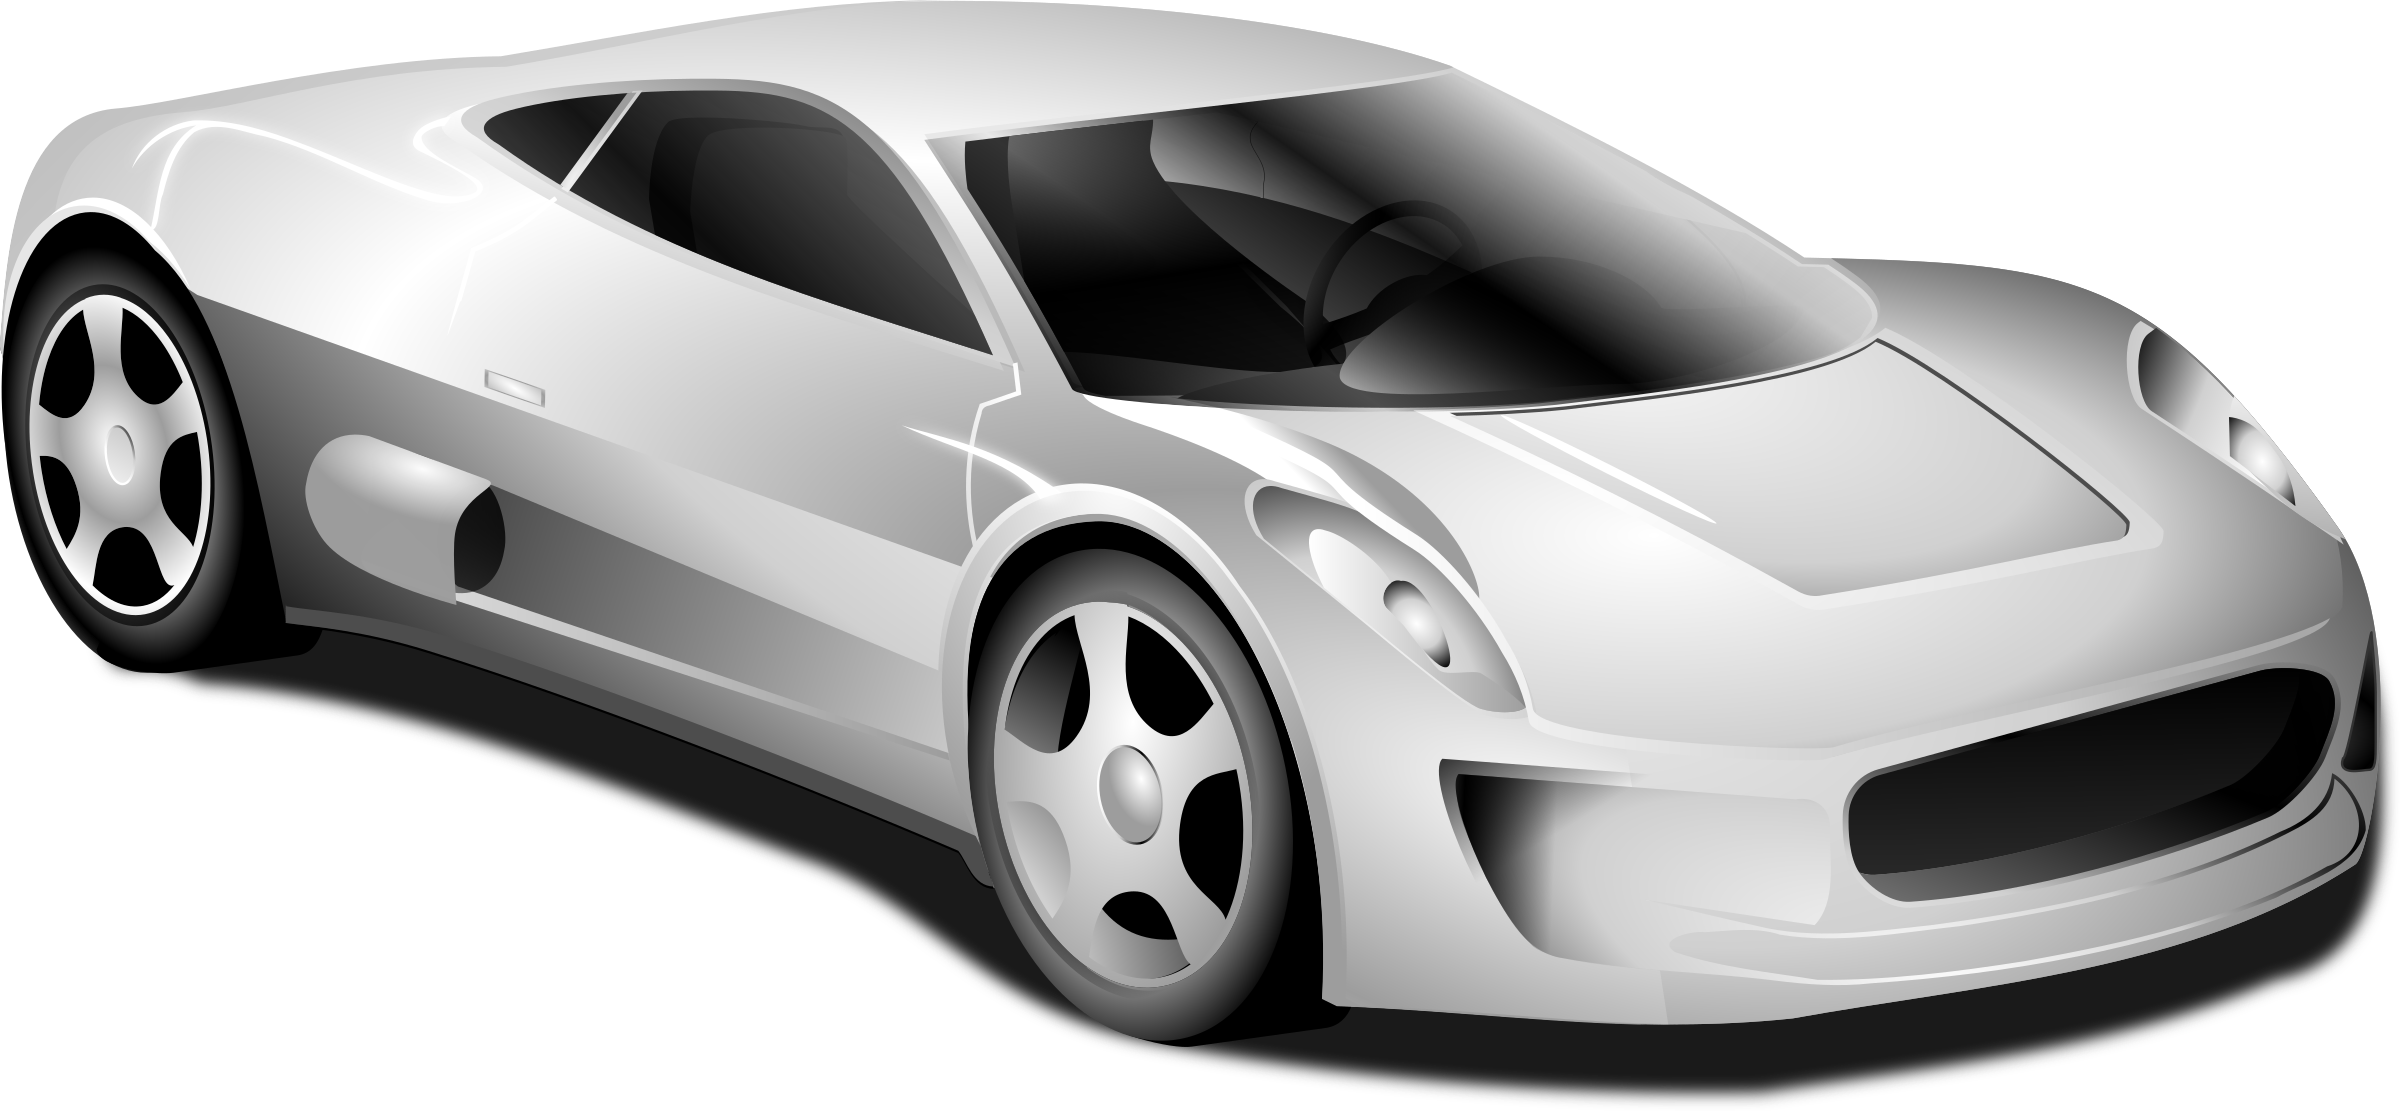 A White Car With A Black Background